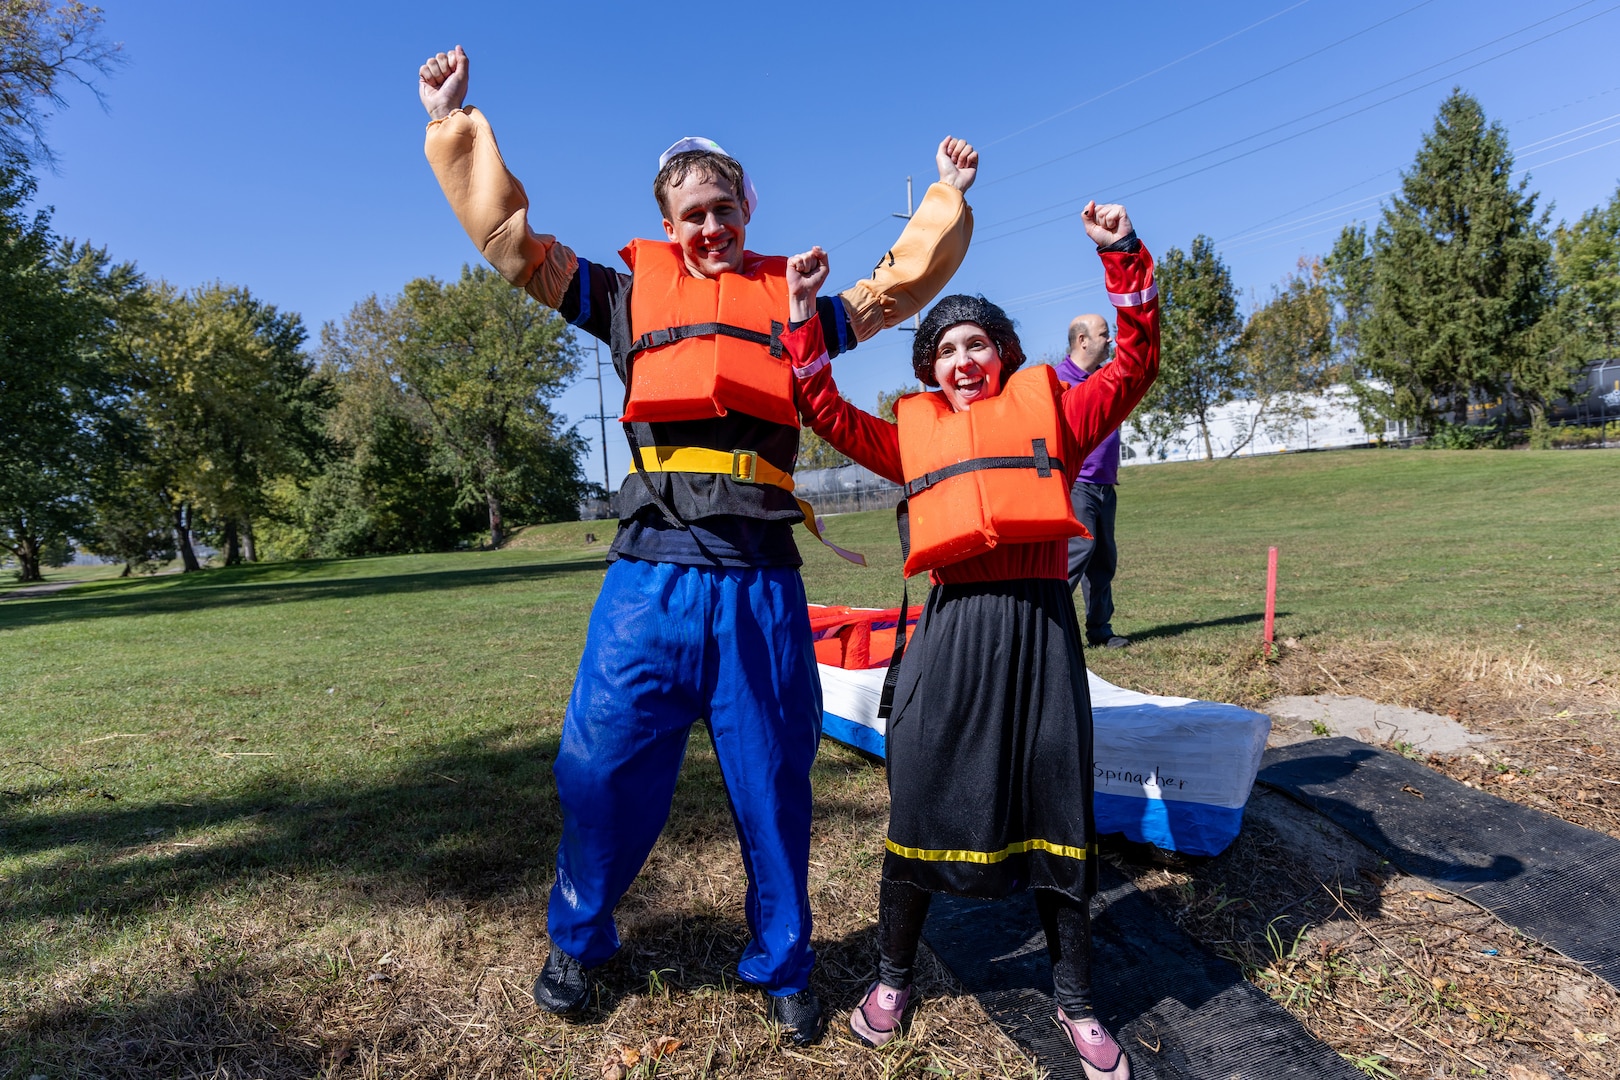 A man and a woman dressed in Popeye the Sailor Man and Olive Oyl costumes complete with the white sailor hat and black hair wig and a red and black dress have their hands up in the air celebratory style. A large canoe-shaped cardboard boat sits behind them. They are outside.